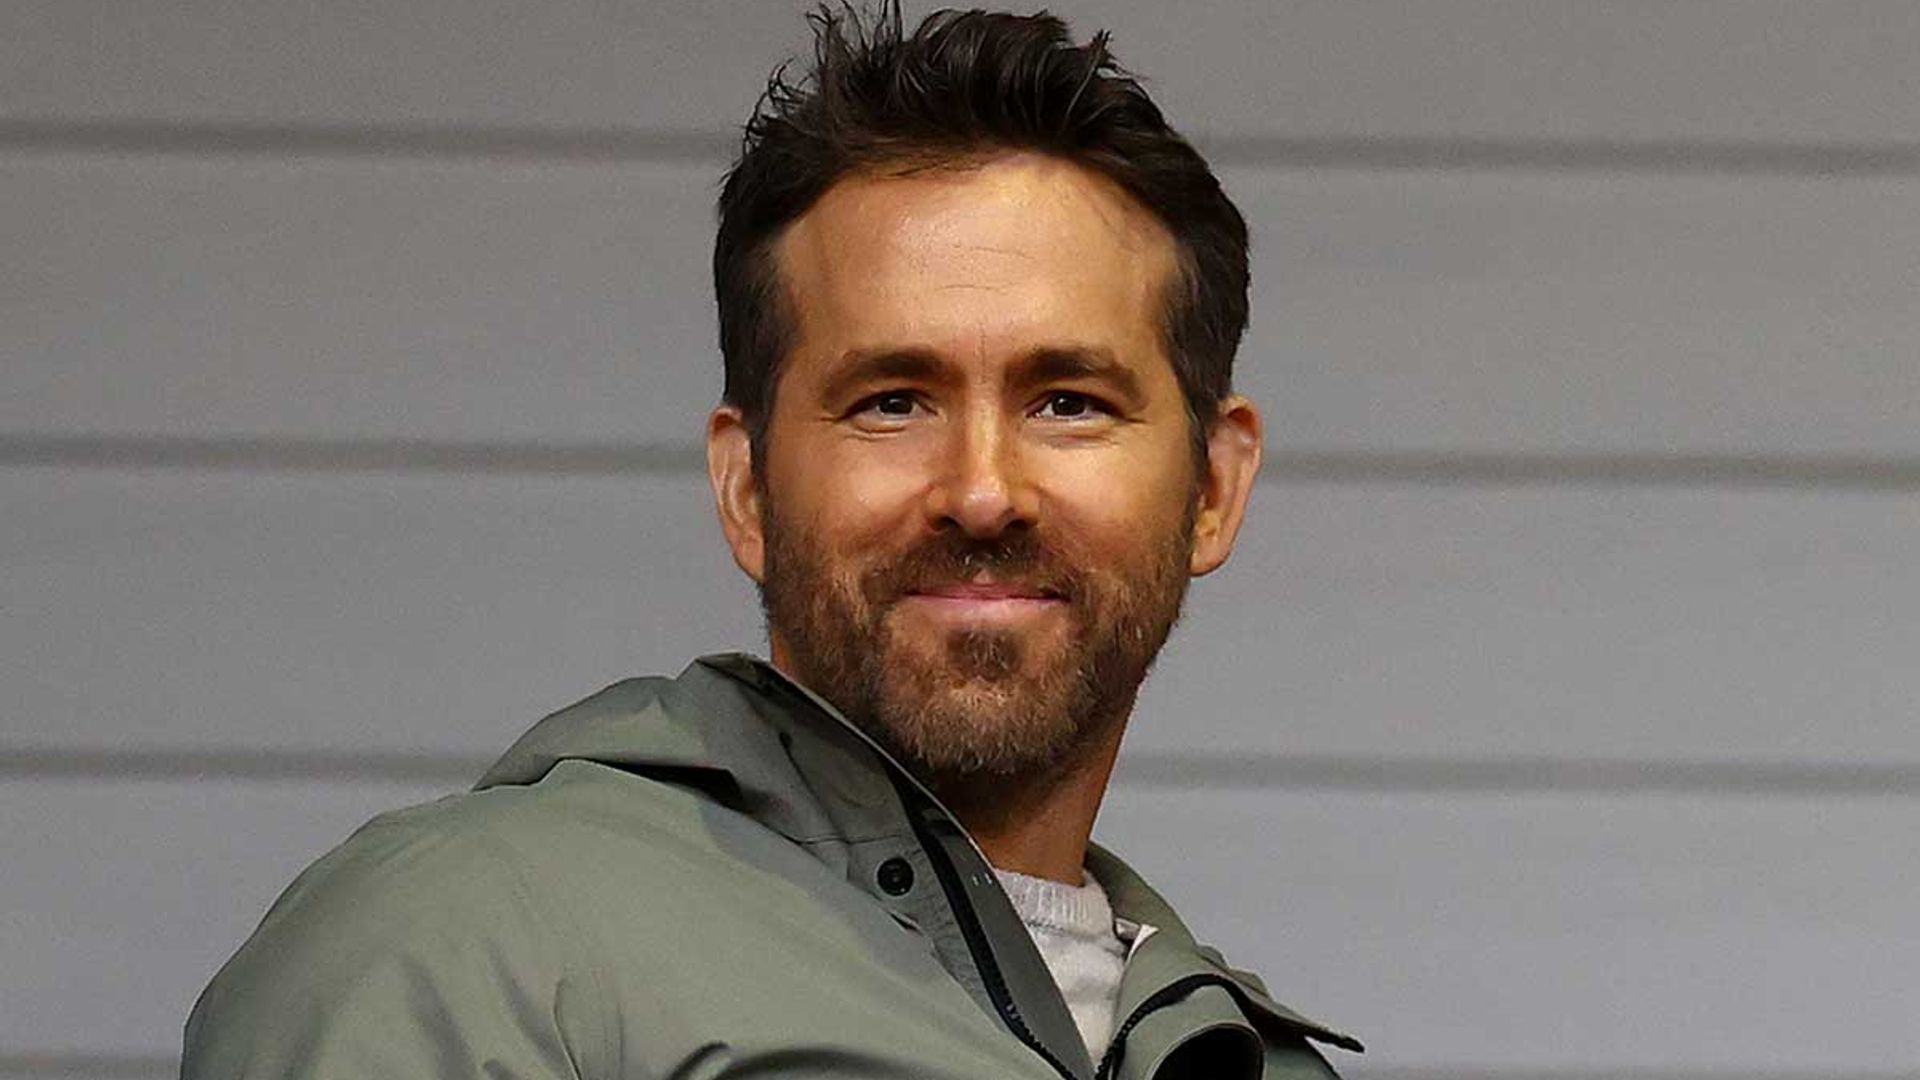 blake livelys husband ryan reynolds comeptitive workout photo fans weigh in